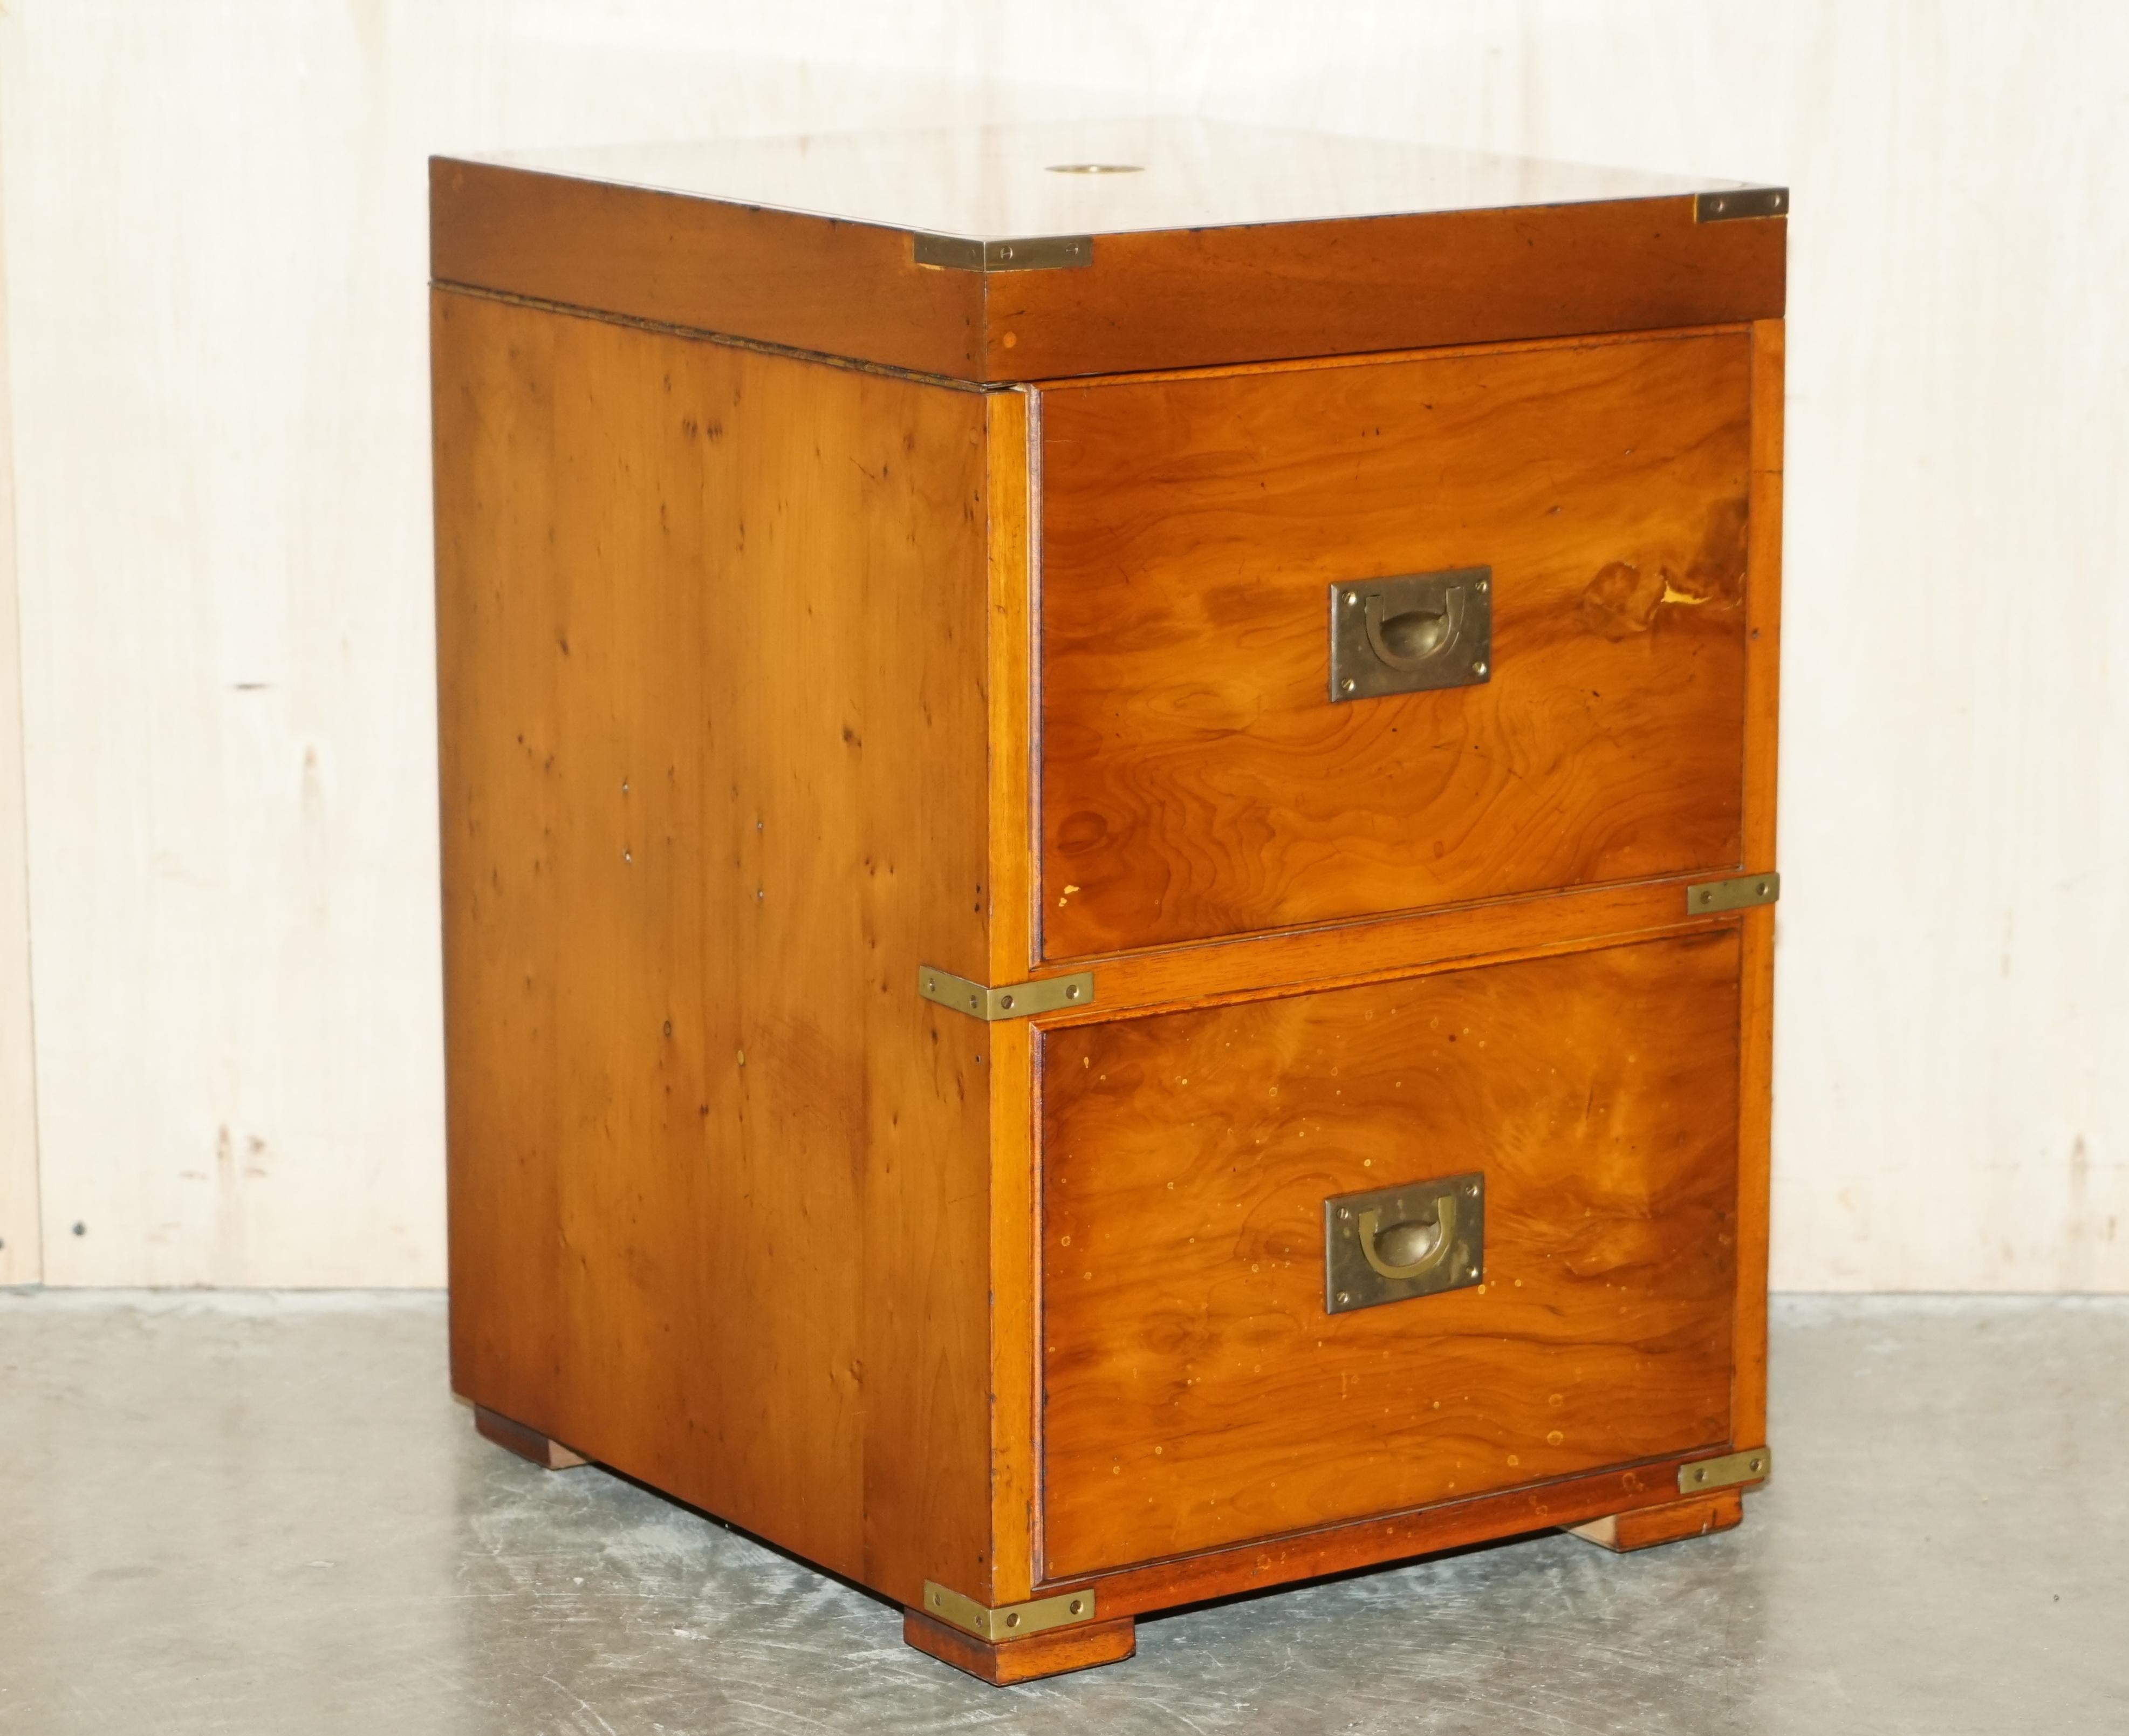 We are delighted to offer for sale this stunning Burr Yew & Elm Military Campaign side table sides drawers unit which houses a drinks cabinet

A very good looking well made and decorative piece, the drawers are faux and the whole piece is designed